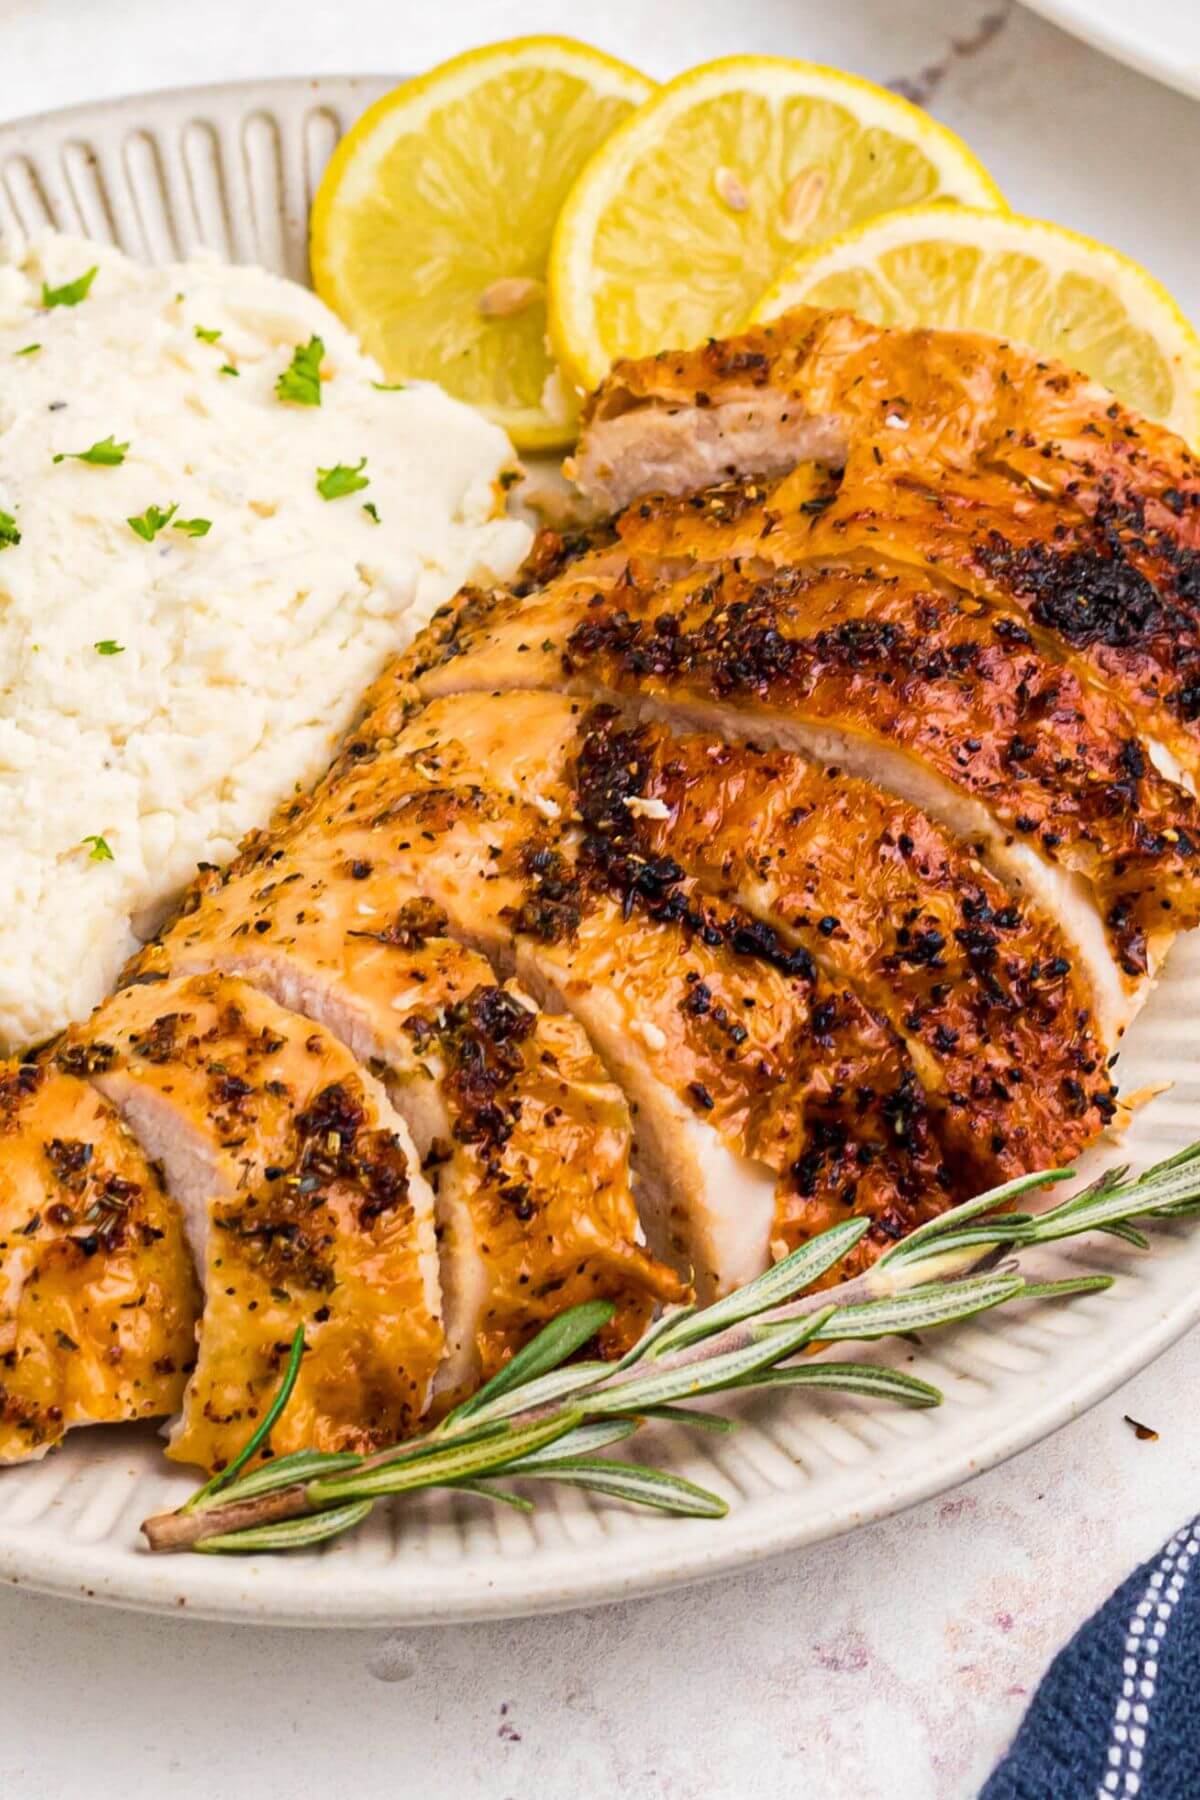 Golden brown turkey breast slices on a white plate with mashed potatoes and lemon slices. 